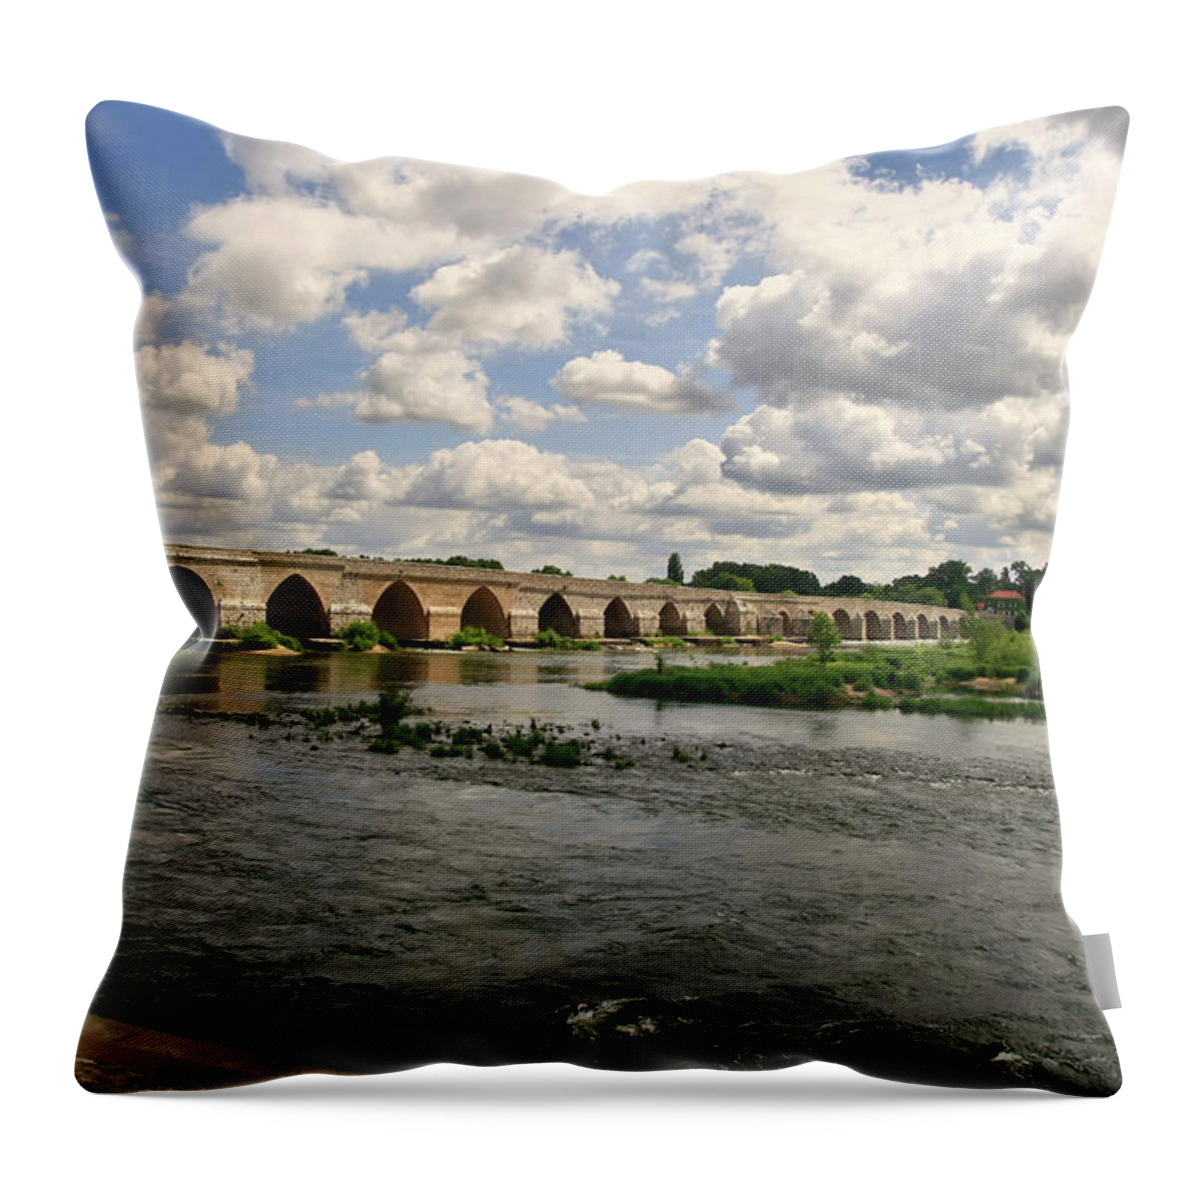 Loire Valley Throw Pillow featuring the photograph Loire River At Beaugency, France by Charles Briscoe-knight